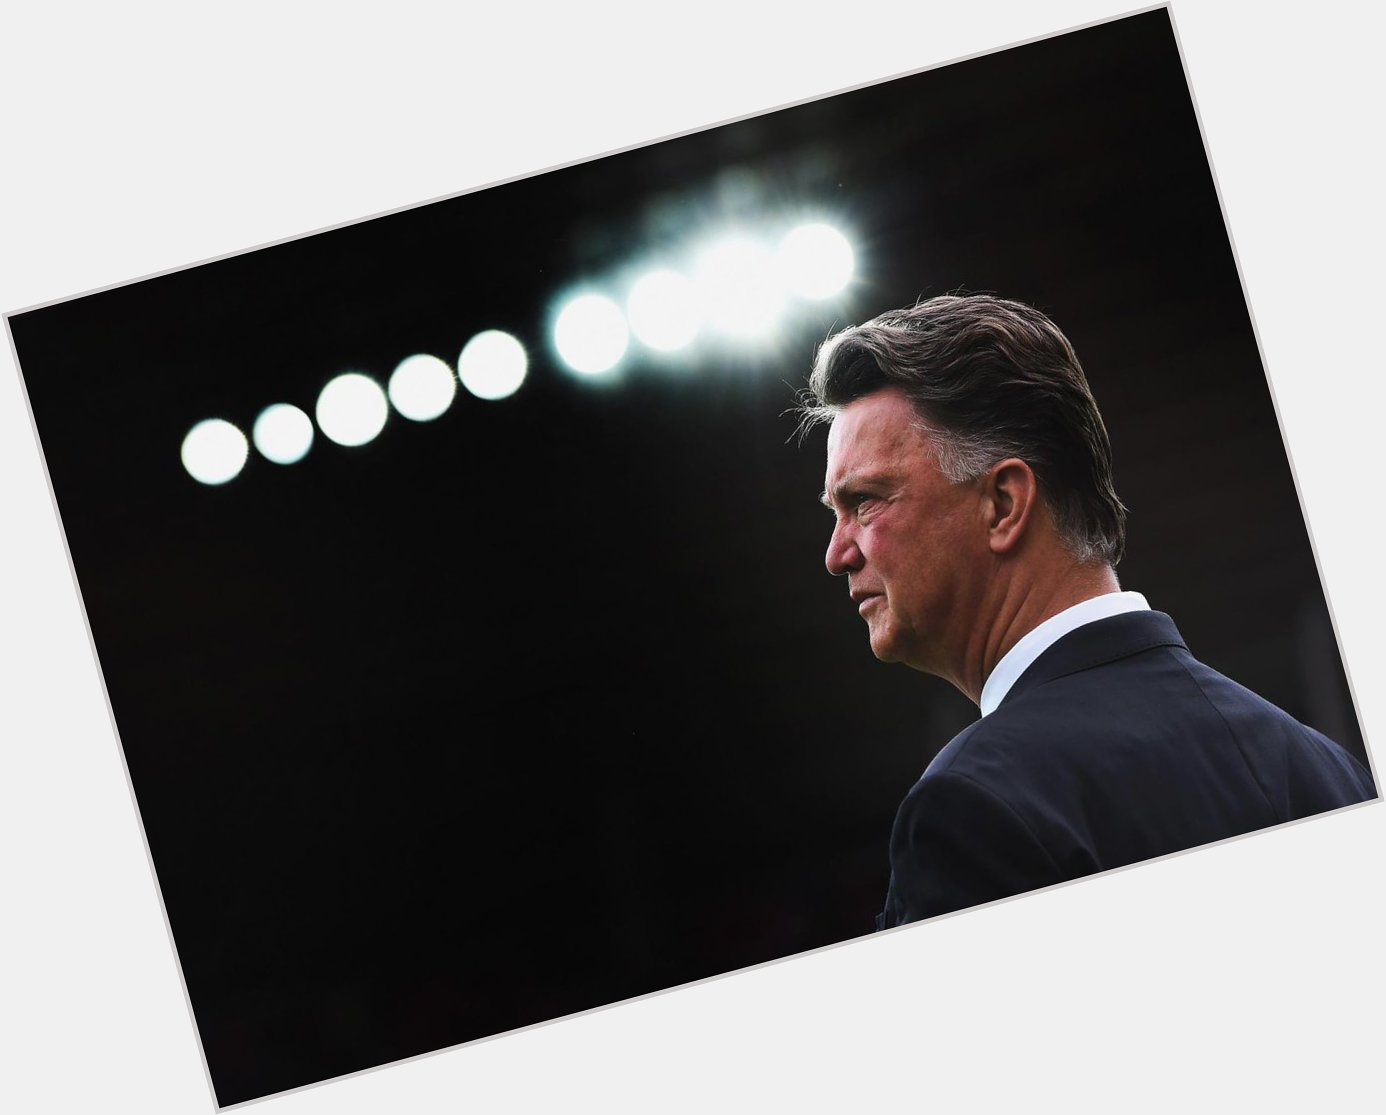 Happy 64th birthday to Louis van Gaal. Lets give the manager a win vs Tottenham for his birthday! 